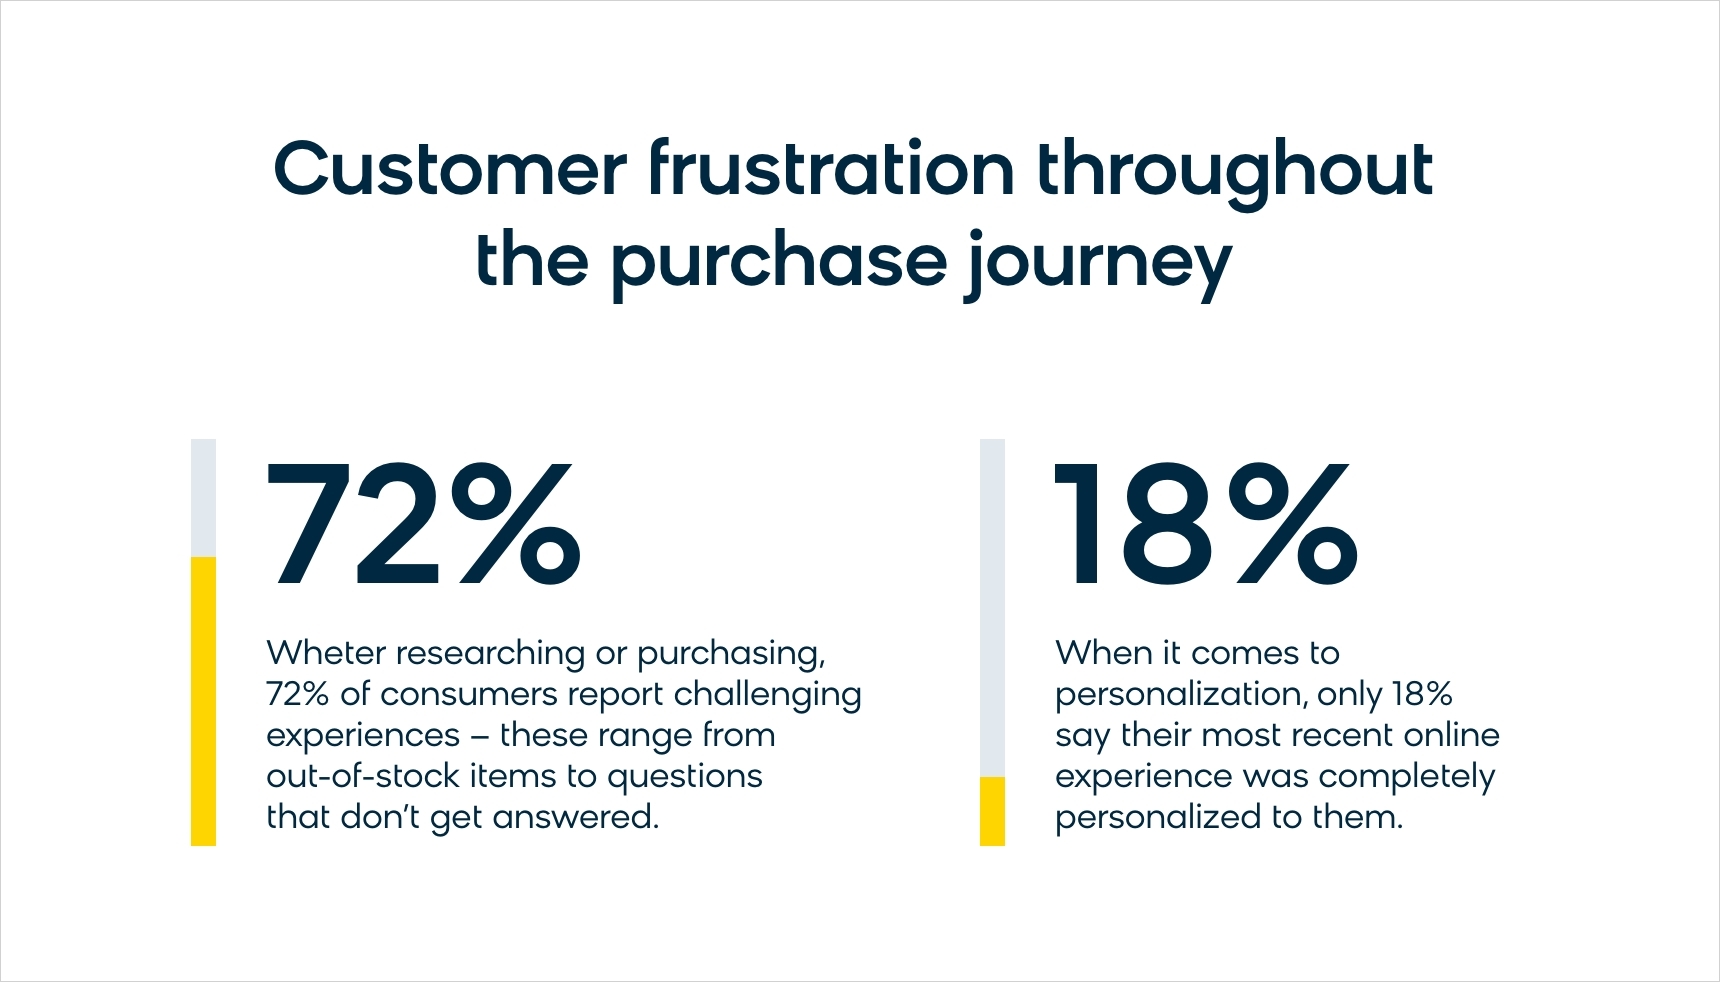 Only 18% of customers say their most recent online experience was completely personalized to them